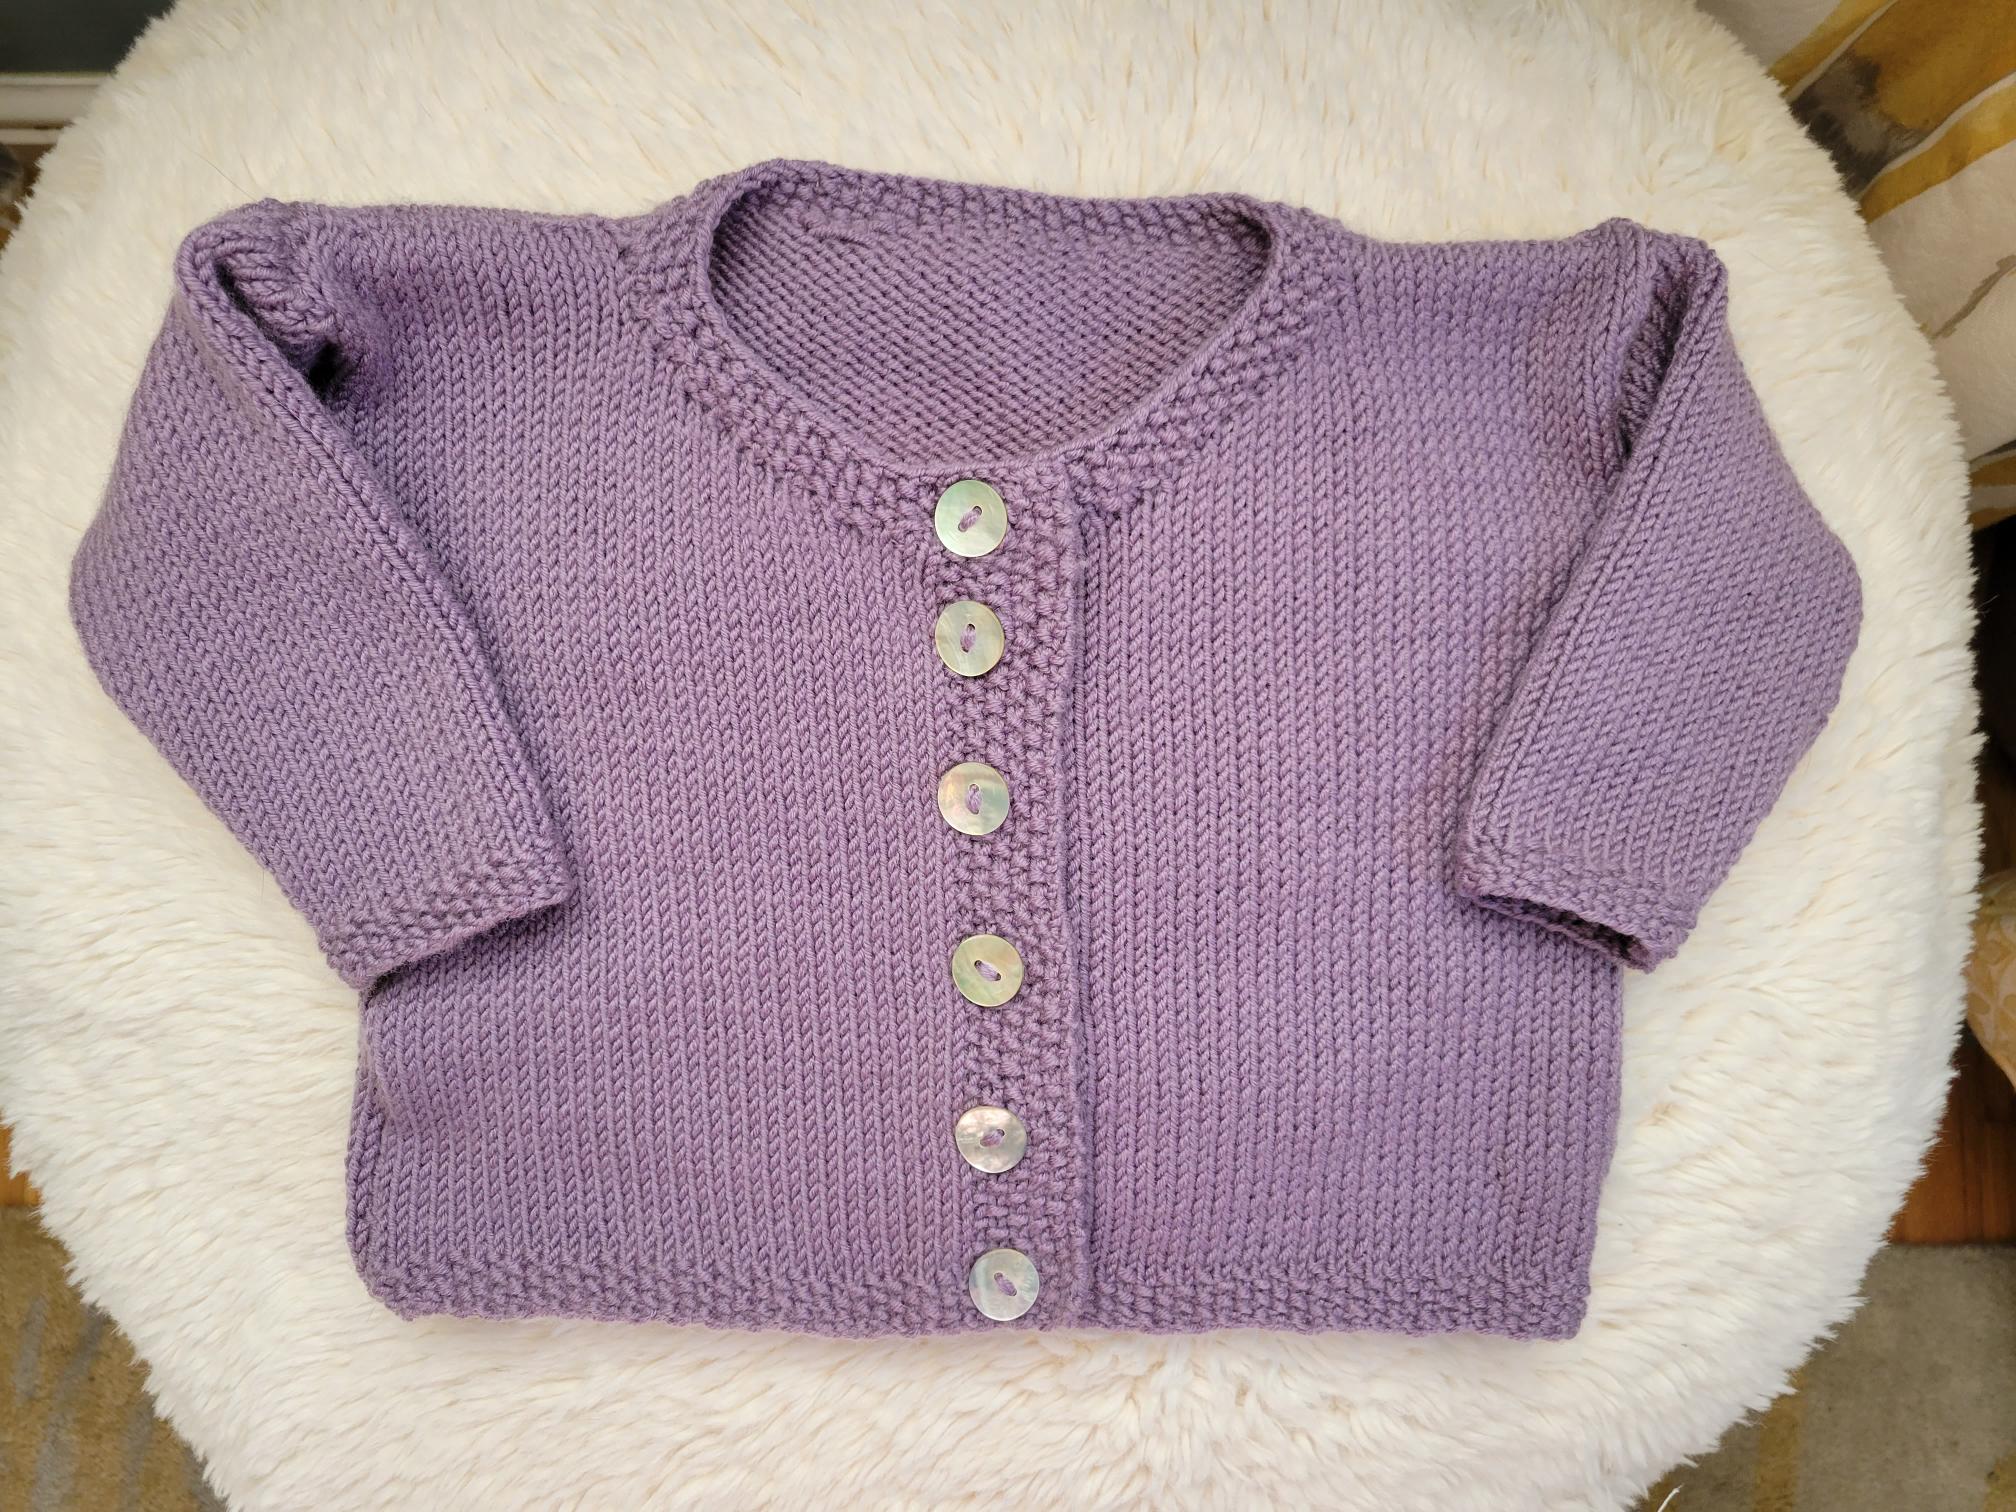 a handknit, lilac-colored baby sweater with shell-colored buttons